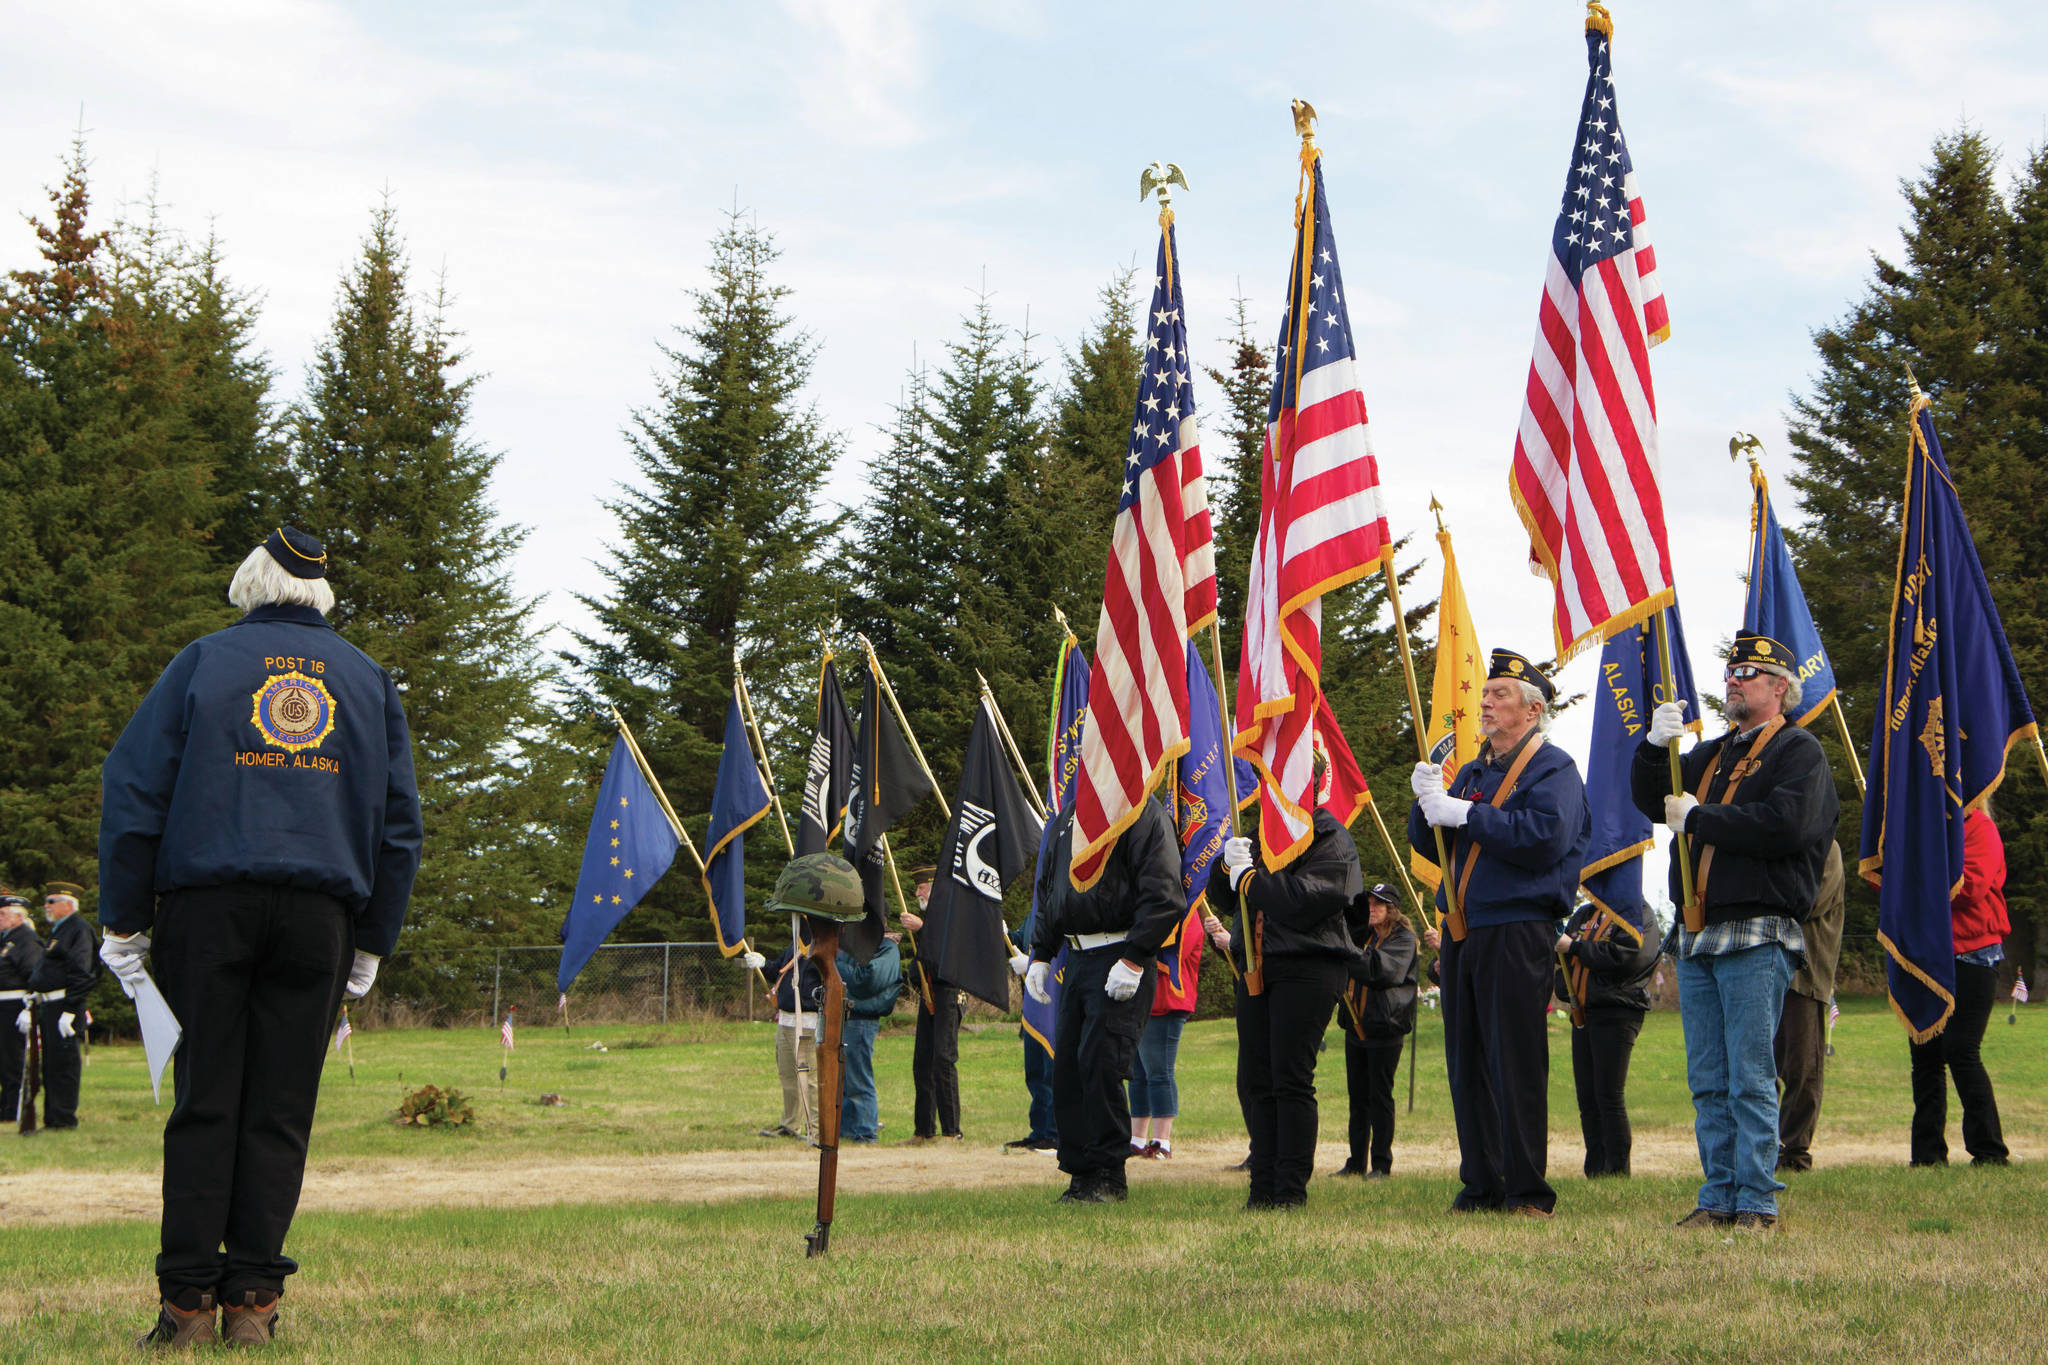 The American Legion Post 16, Homer, American Legion Post 19, Ninilchik, Veterans of Foreign Wars Post 10221, Anchor Point, color guard stands at attention while Taps is played in honor of all servicemen and women who died in service to the United States of America. The veterans organizations hosted the Memorial Day service at Hickerson Memorial Cemetery May 31. (Photo by Sarah Knapp/Homer News)